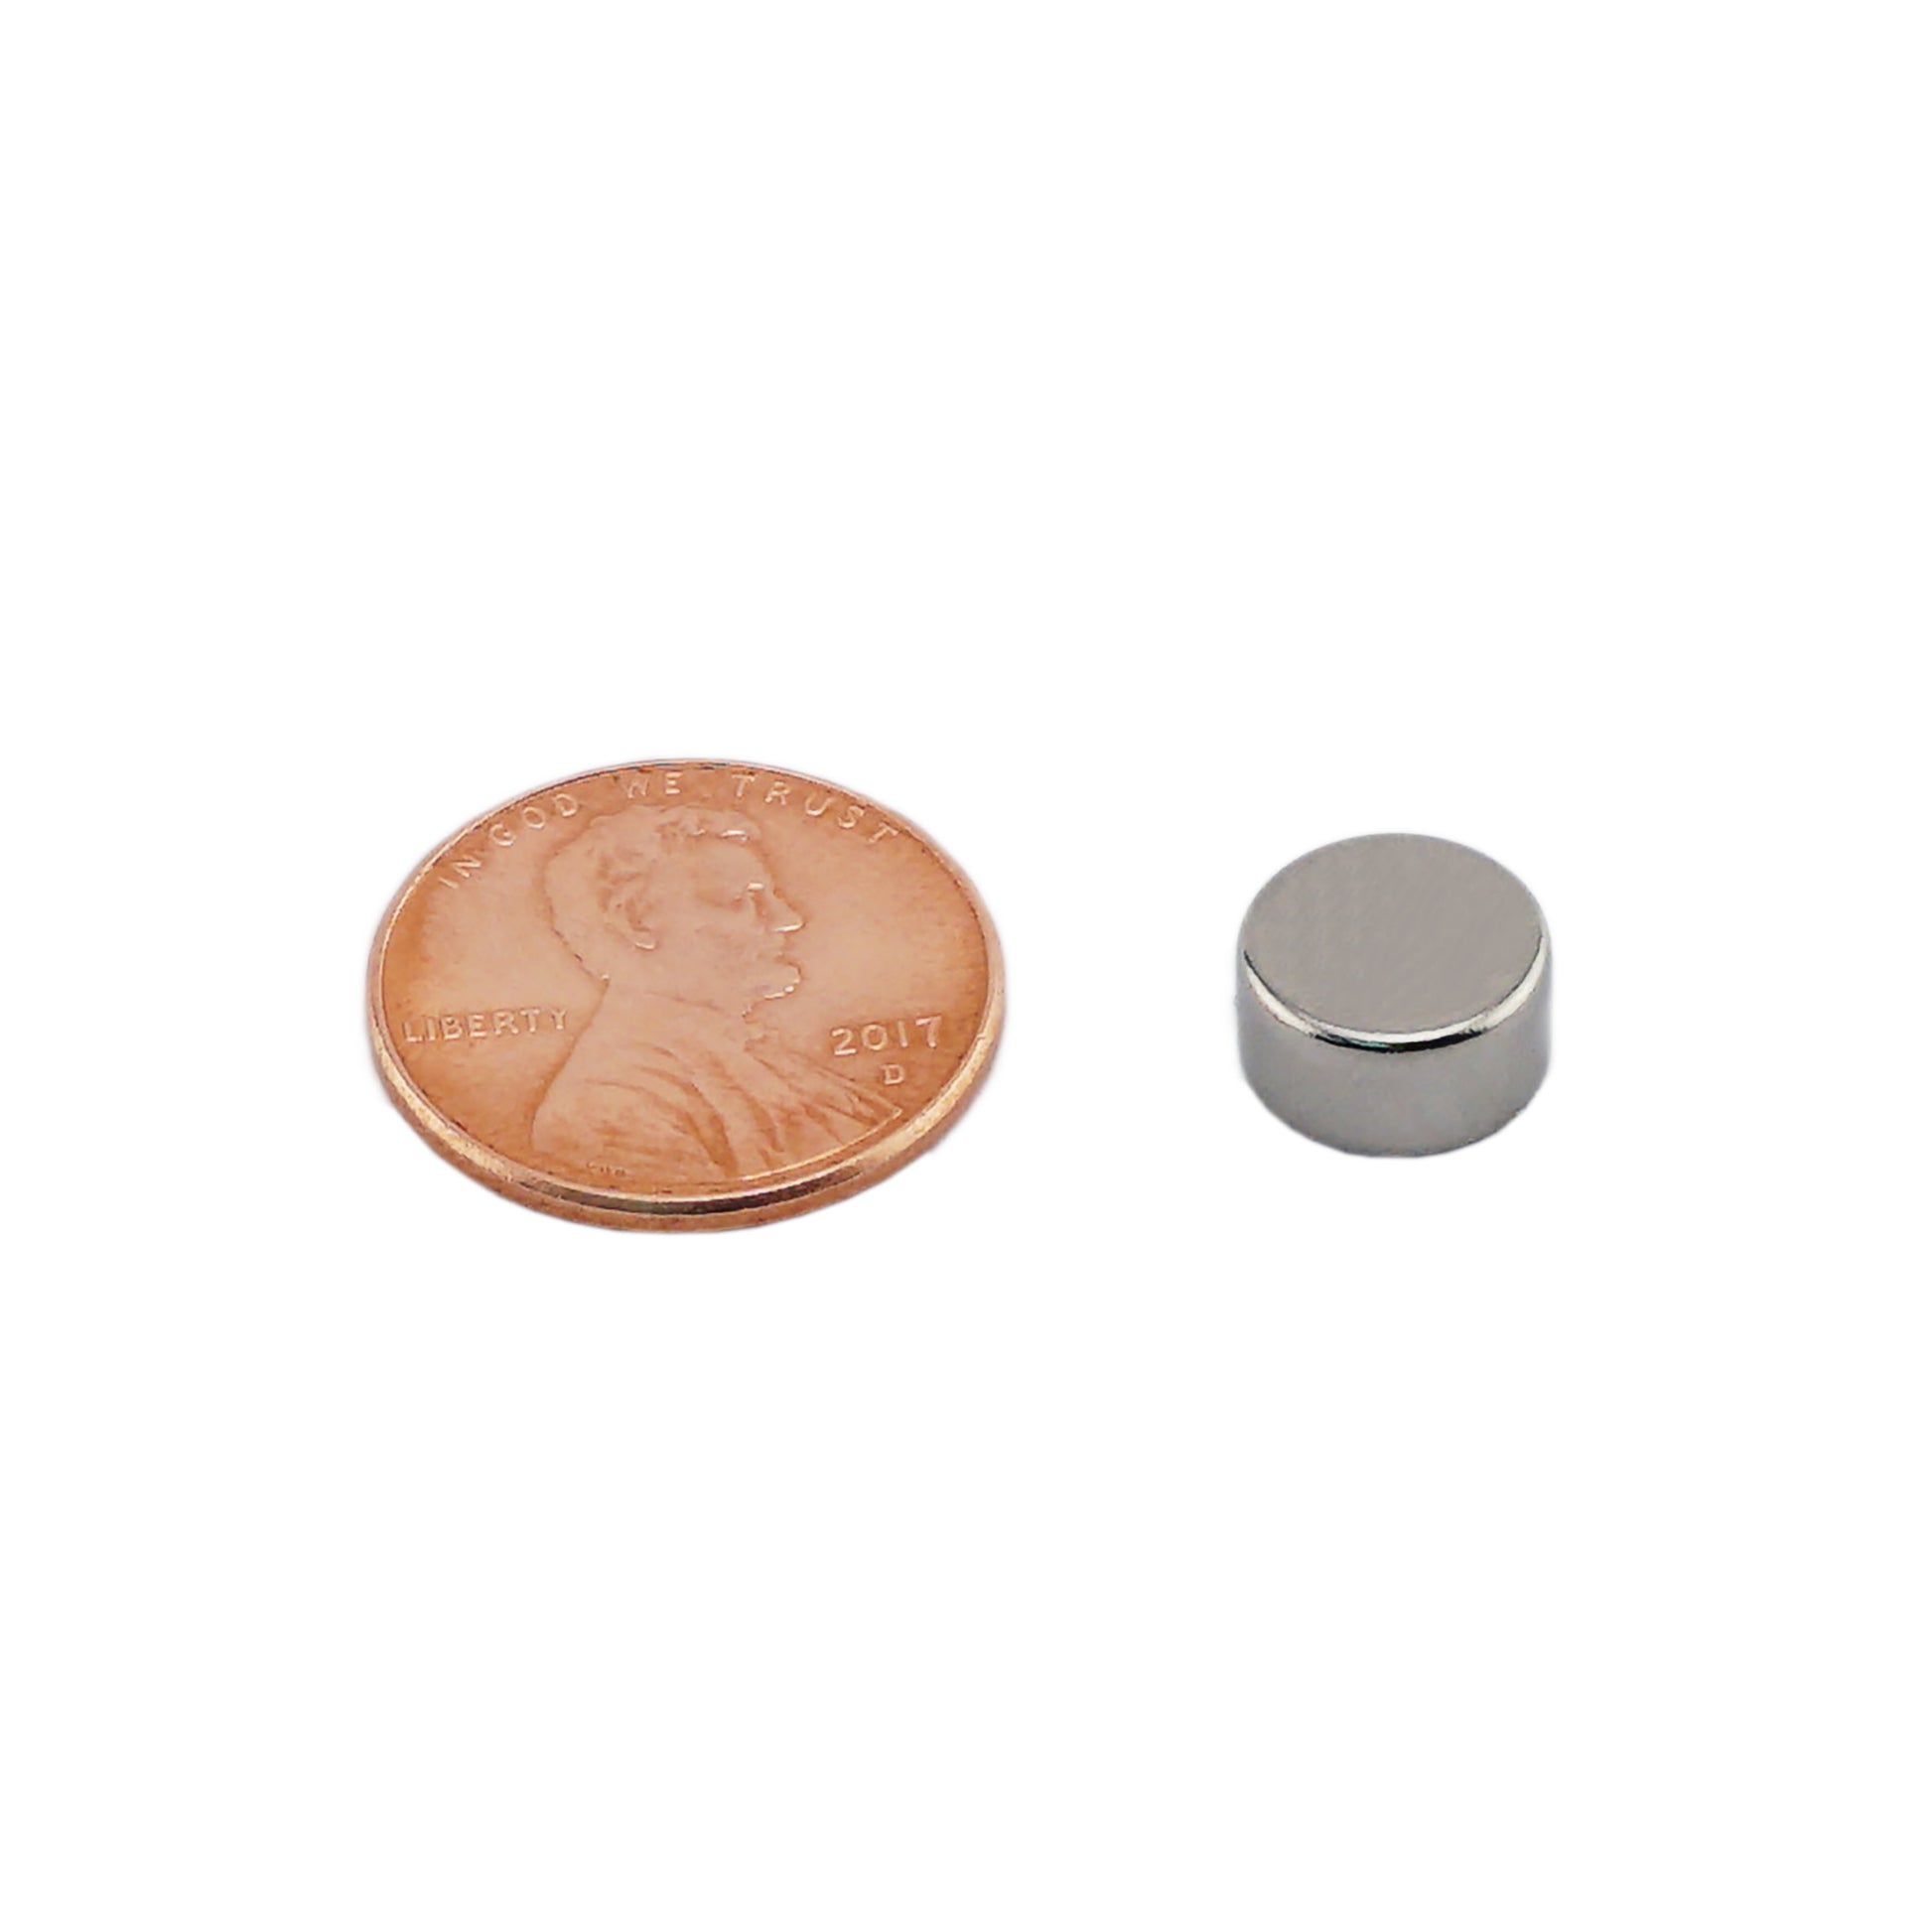 Load image into Gallery viewer, ND144N-35 Neodymium Disc Magnet - Compared to Penny for Size Reference